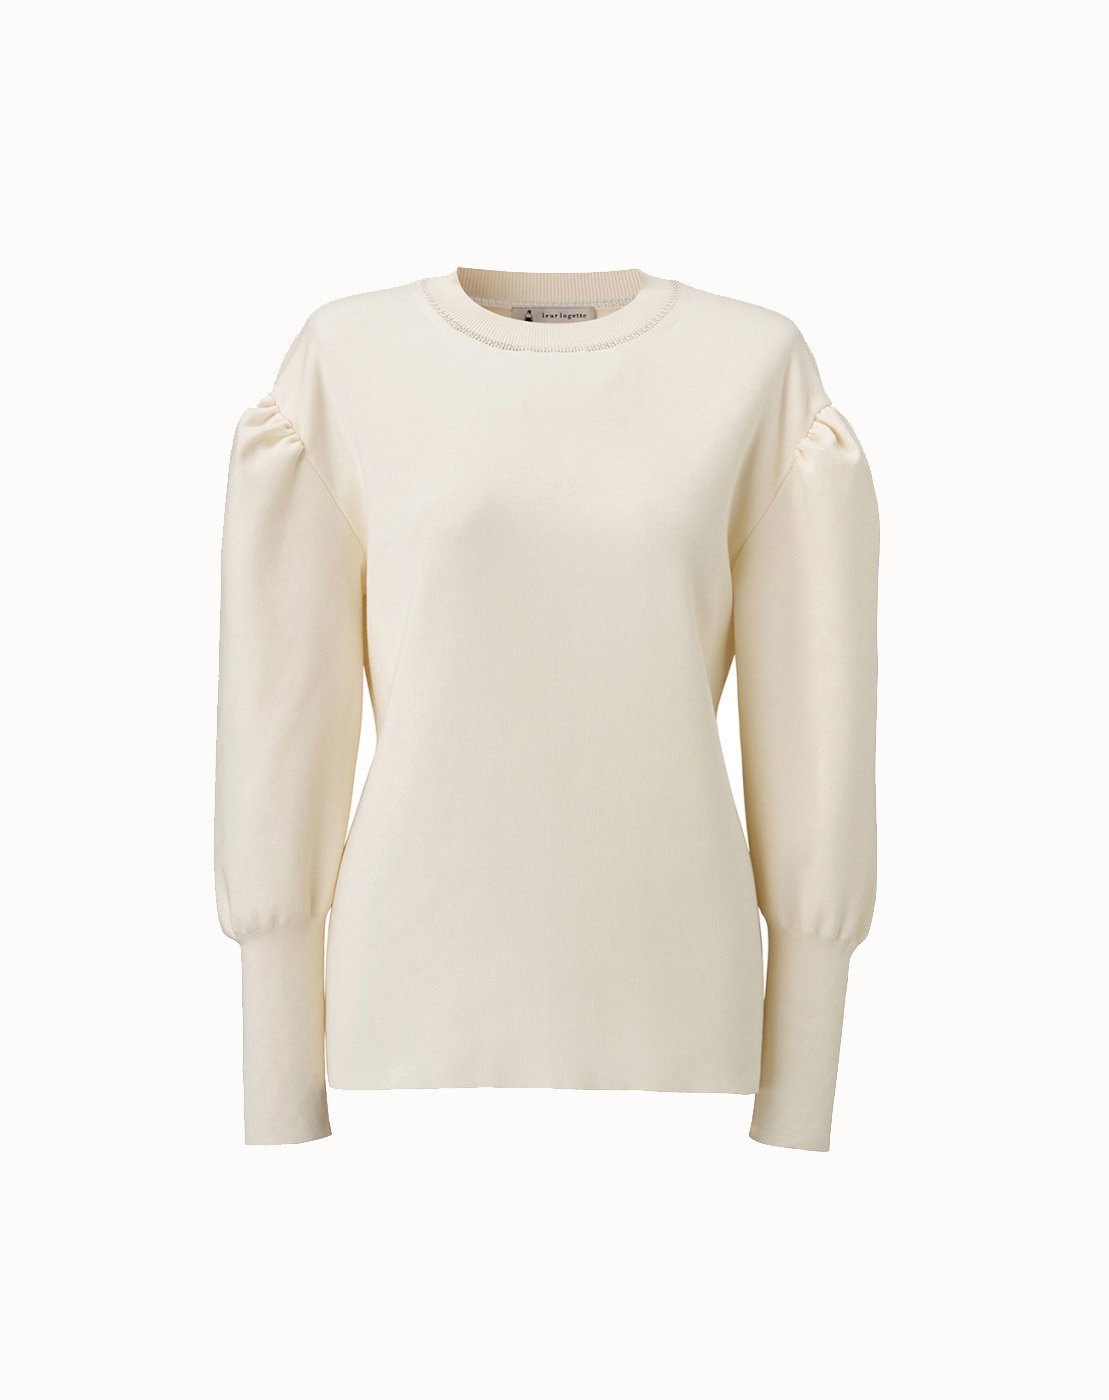 leur logette - <img class='new_mark_img1' src='https://img.shop-pro.jp/img/new/icons1.gif' style='border:none;display:inline;margin:0px;padding:0px;width:auto;' />Pima Cotton Tops - Off White